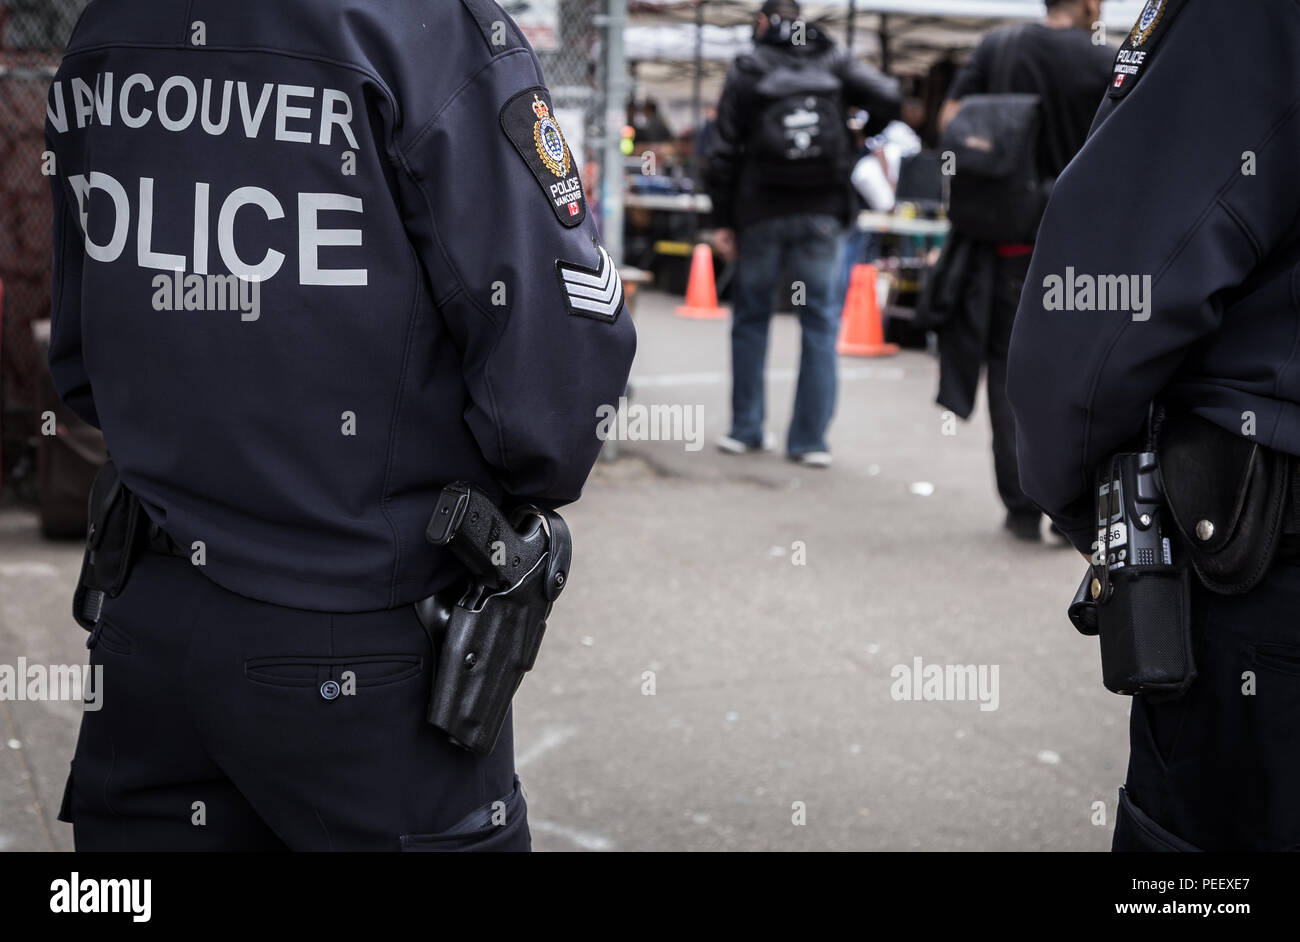 VANCOUVER, BC, CANADA - MAY 11, 2016: A close-up of a Vancouver Police Officer's gun and crest as they patrol the Downtown Eastside. Stock Photo